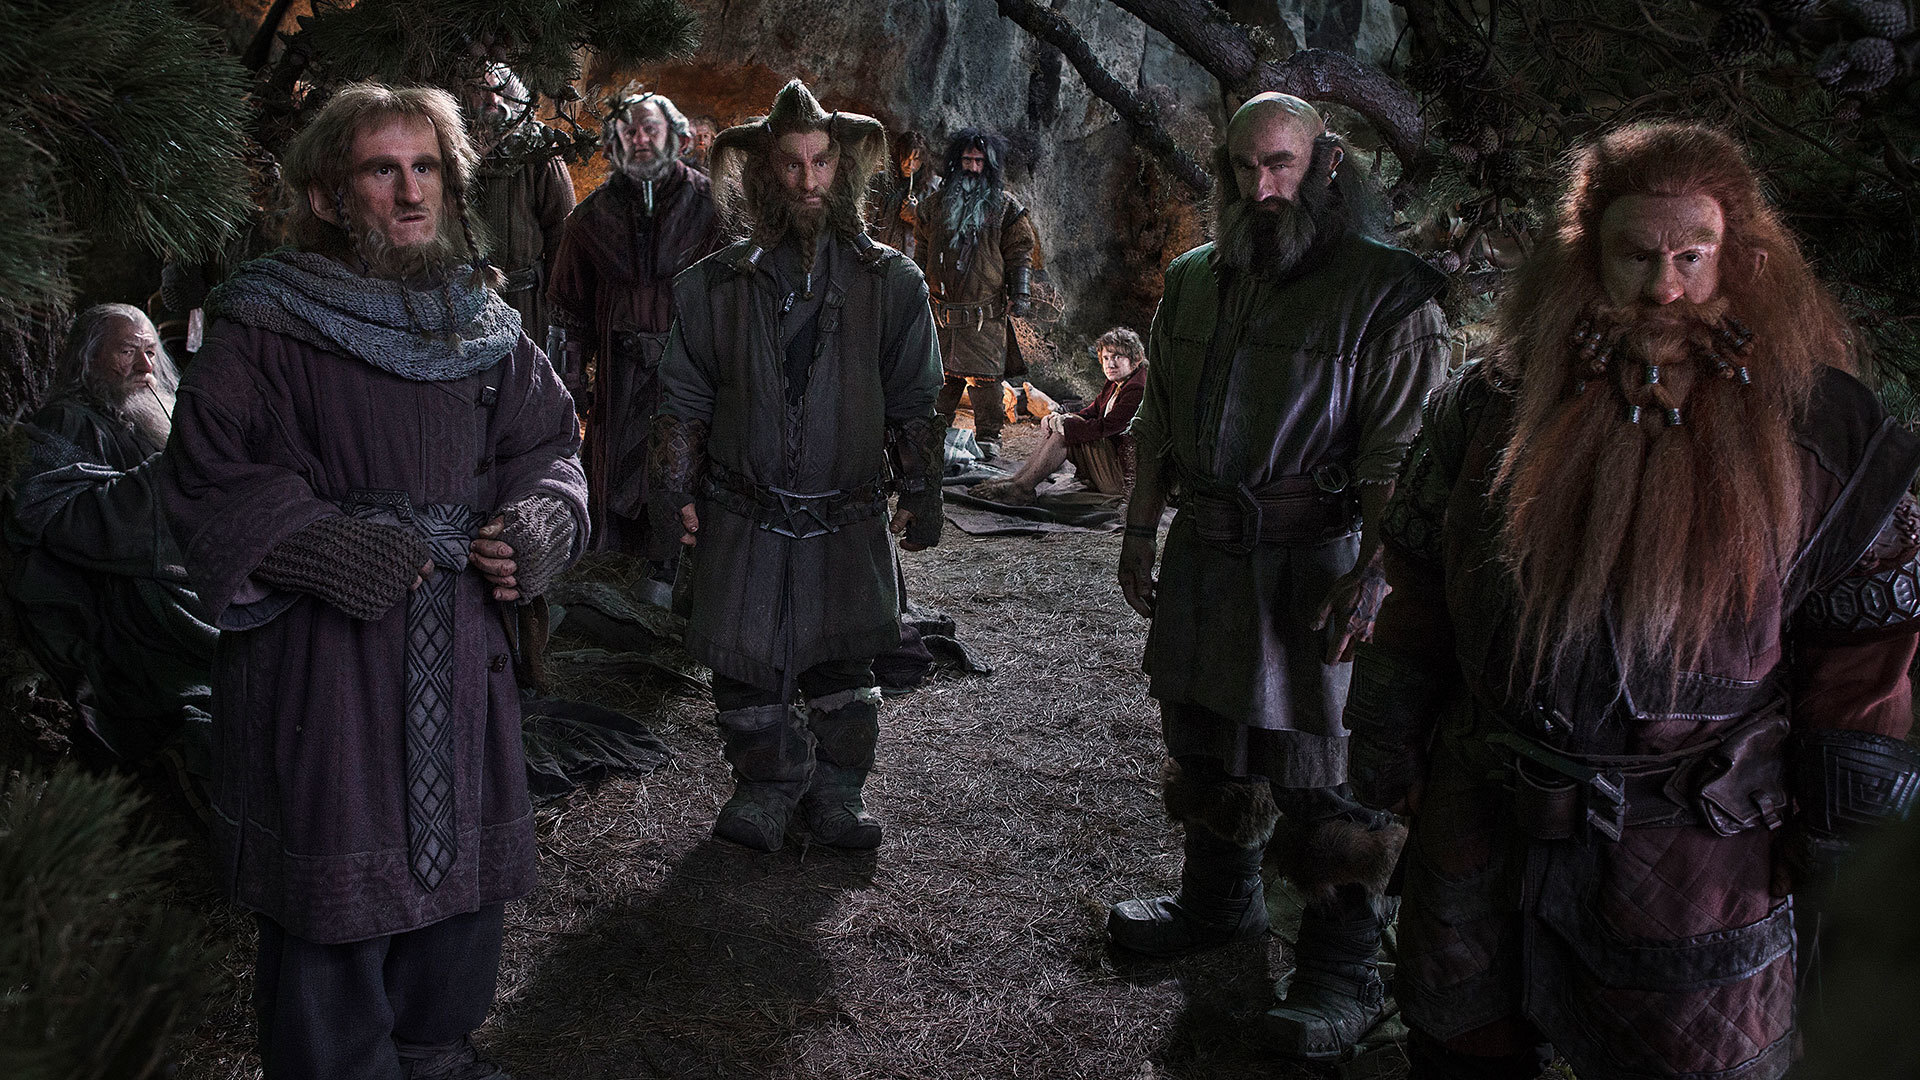 The Hobbit: An Unexpected Journey download